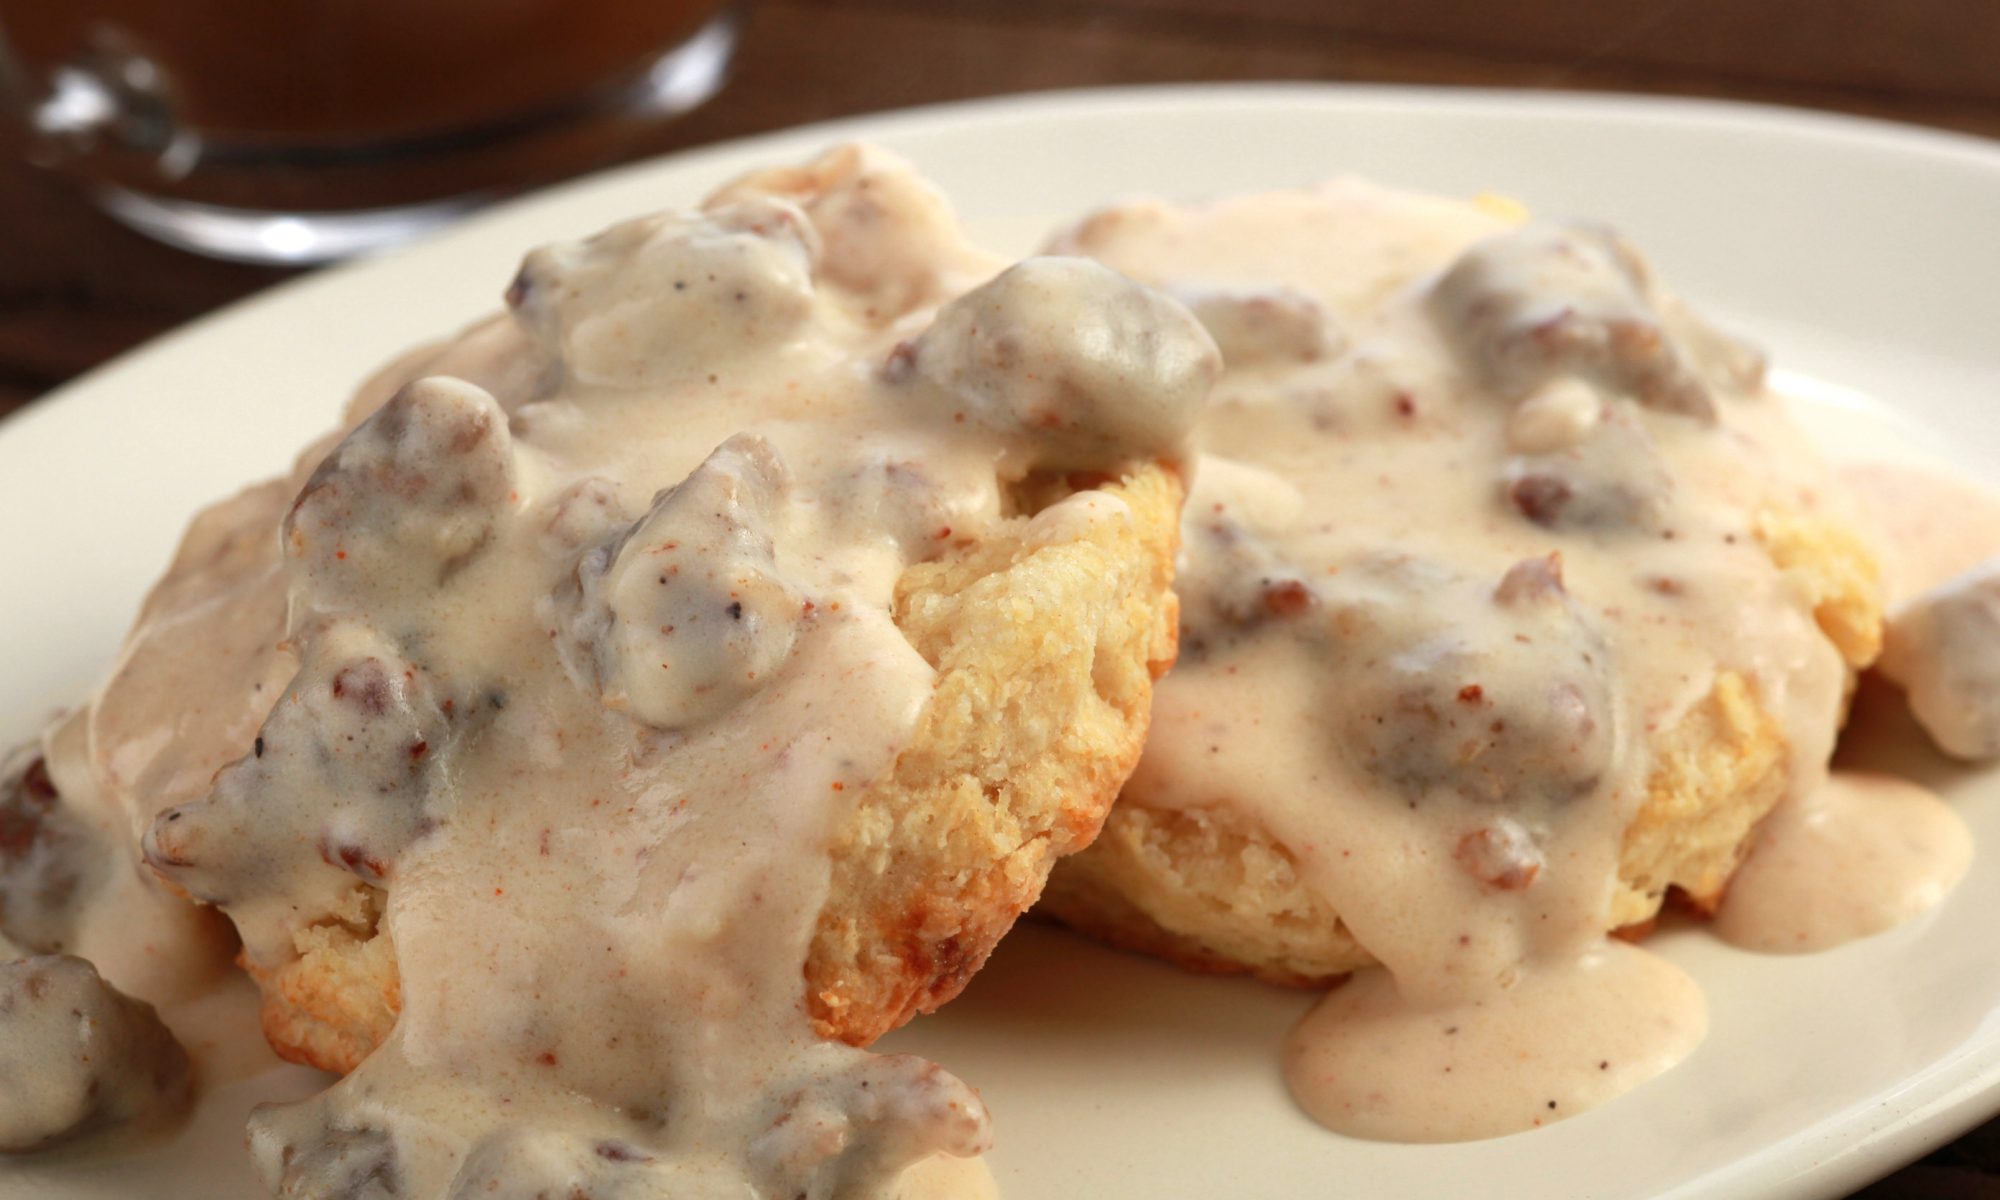 biscuits and gravy image